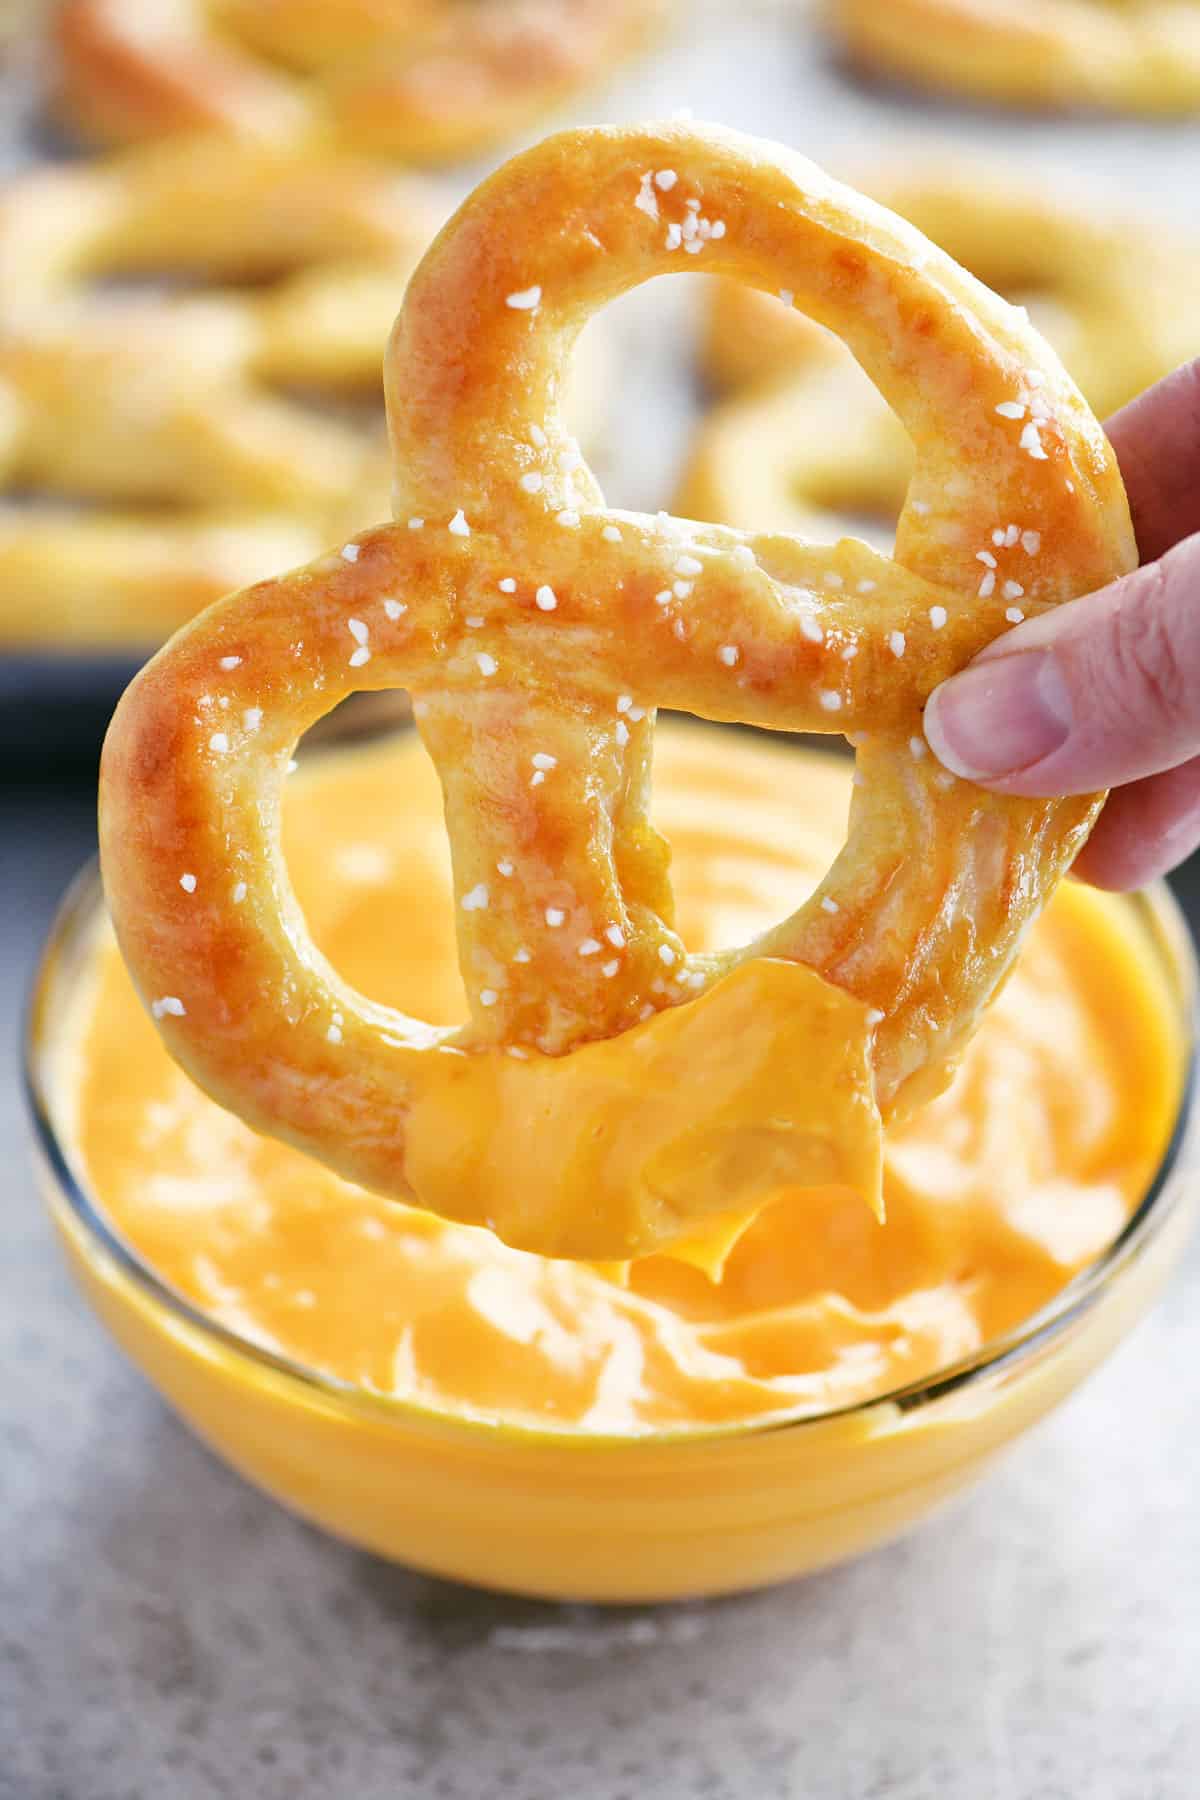 soft pretzel dipped in cheese sauce